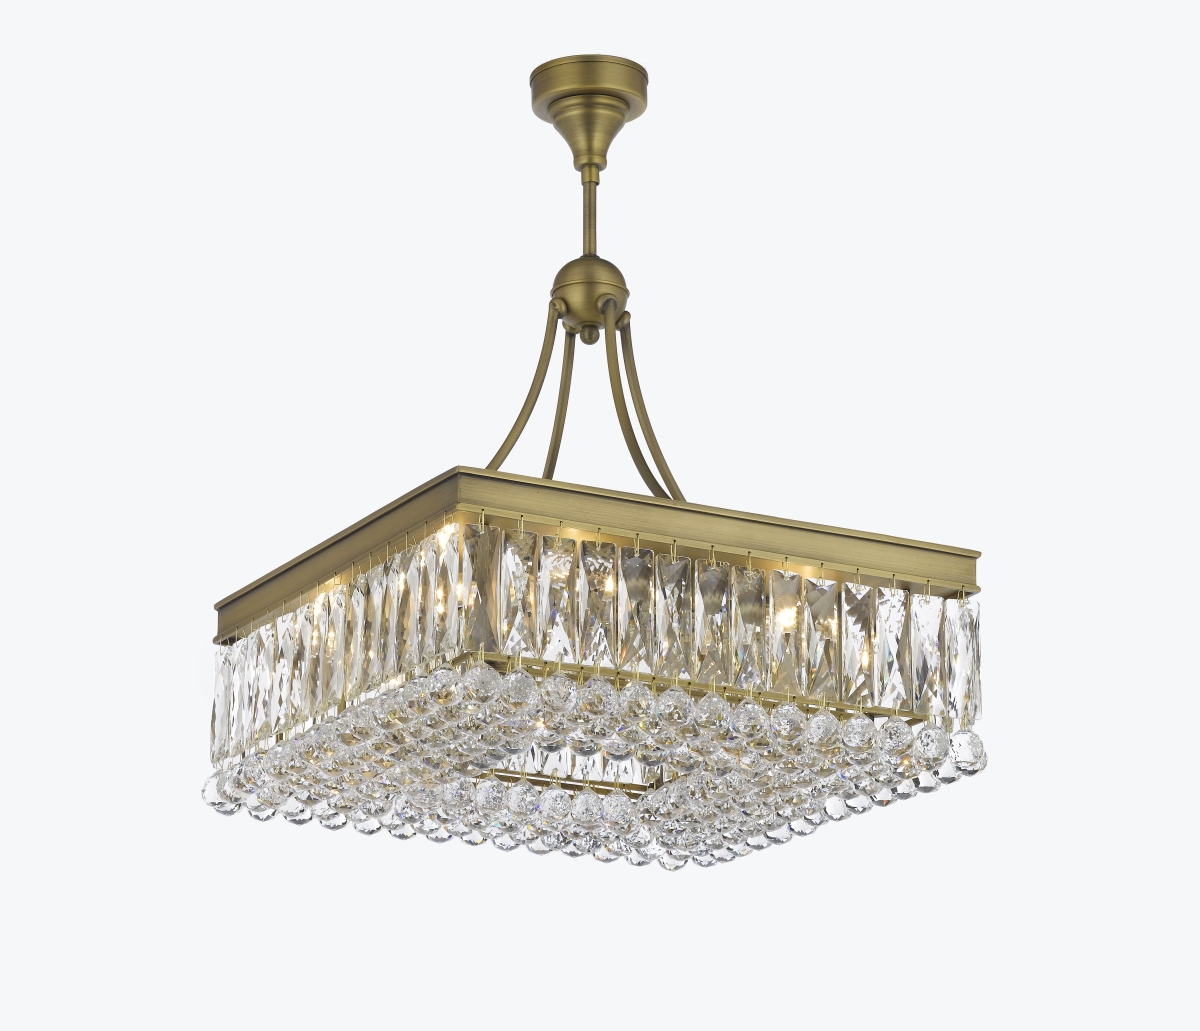 Pwg Lighting 2904-20-ag 20 In. Valencia Hanging Chandelier With Heirloom Grandcut Crystals - Antique Gold